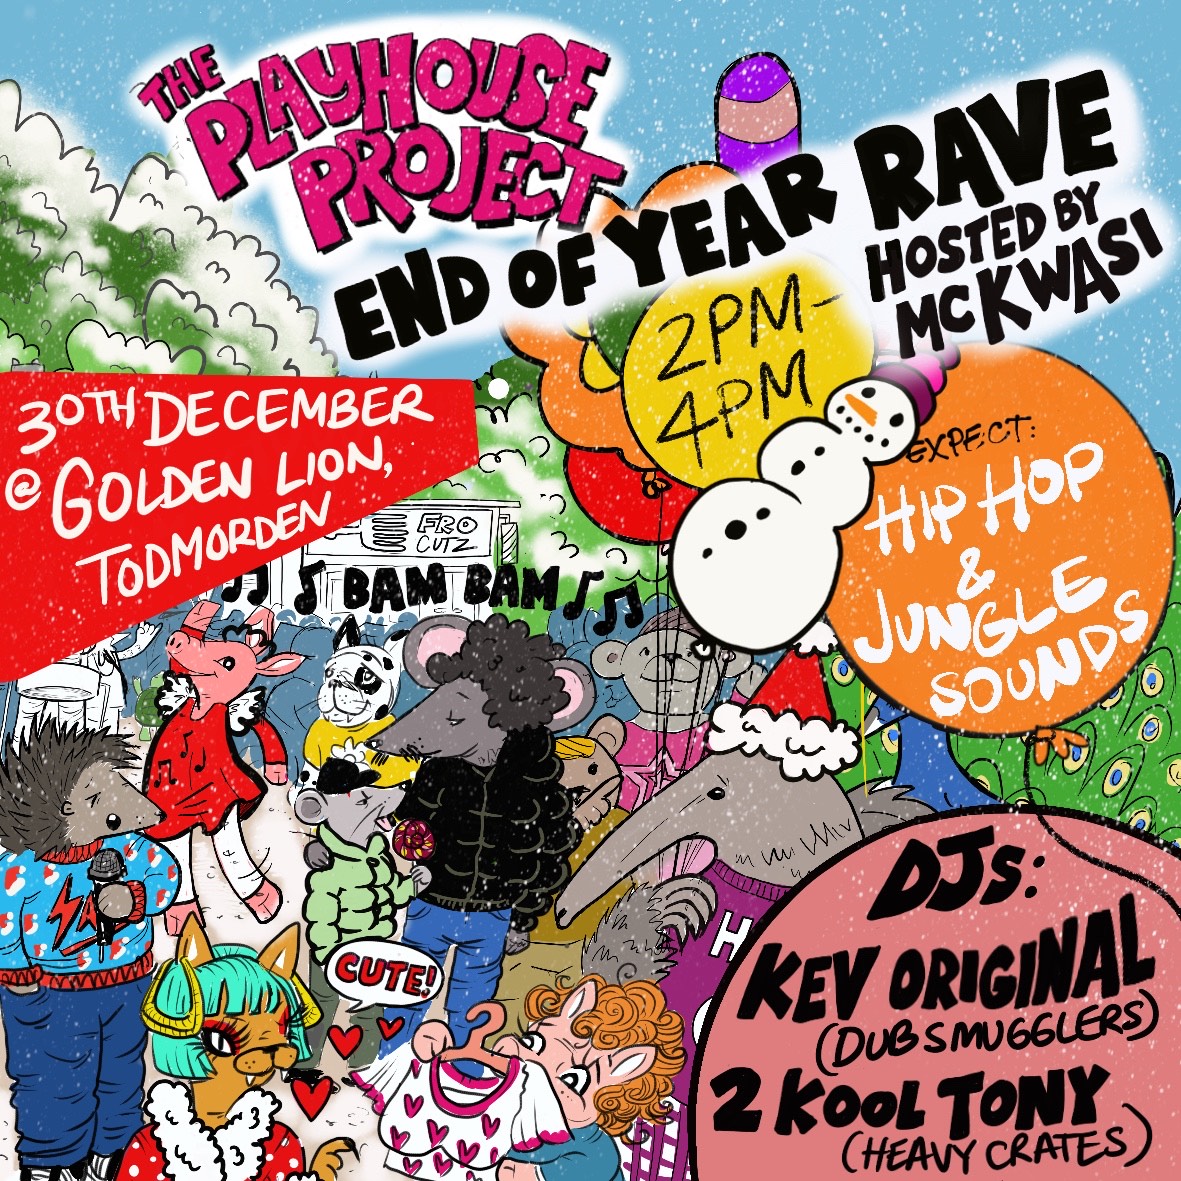 THE PLAYHOUSE PROJECT END OF YEAR FAMILY RAVE with 2 Kool Tony & Kev Original B2B Hosted by King of the mic MC Kwasi 🔥 🚧 Reggae, Dancehall, Hip Hop & Soul 🚧 Tickets here 👉 skiddle.com/e/35961852